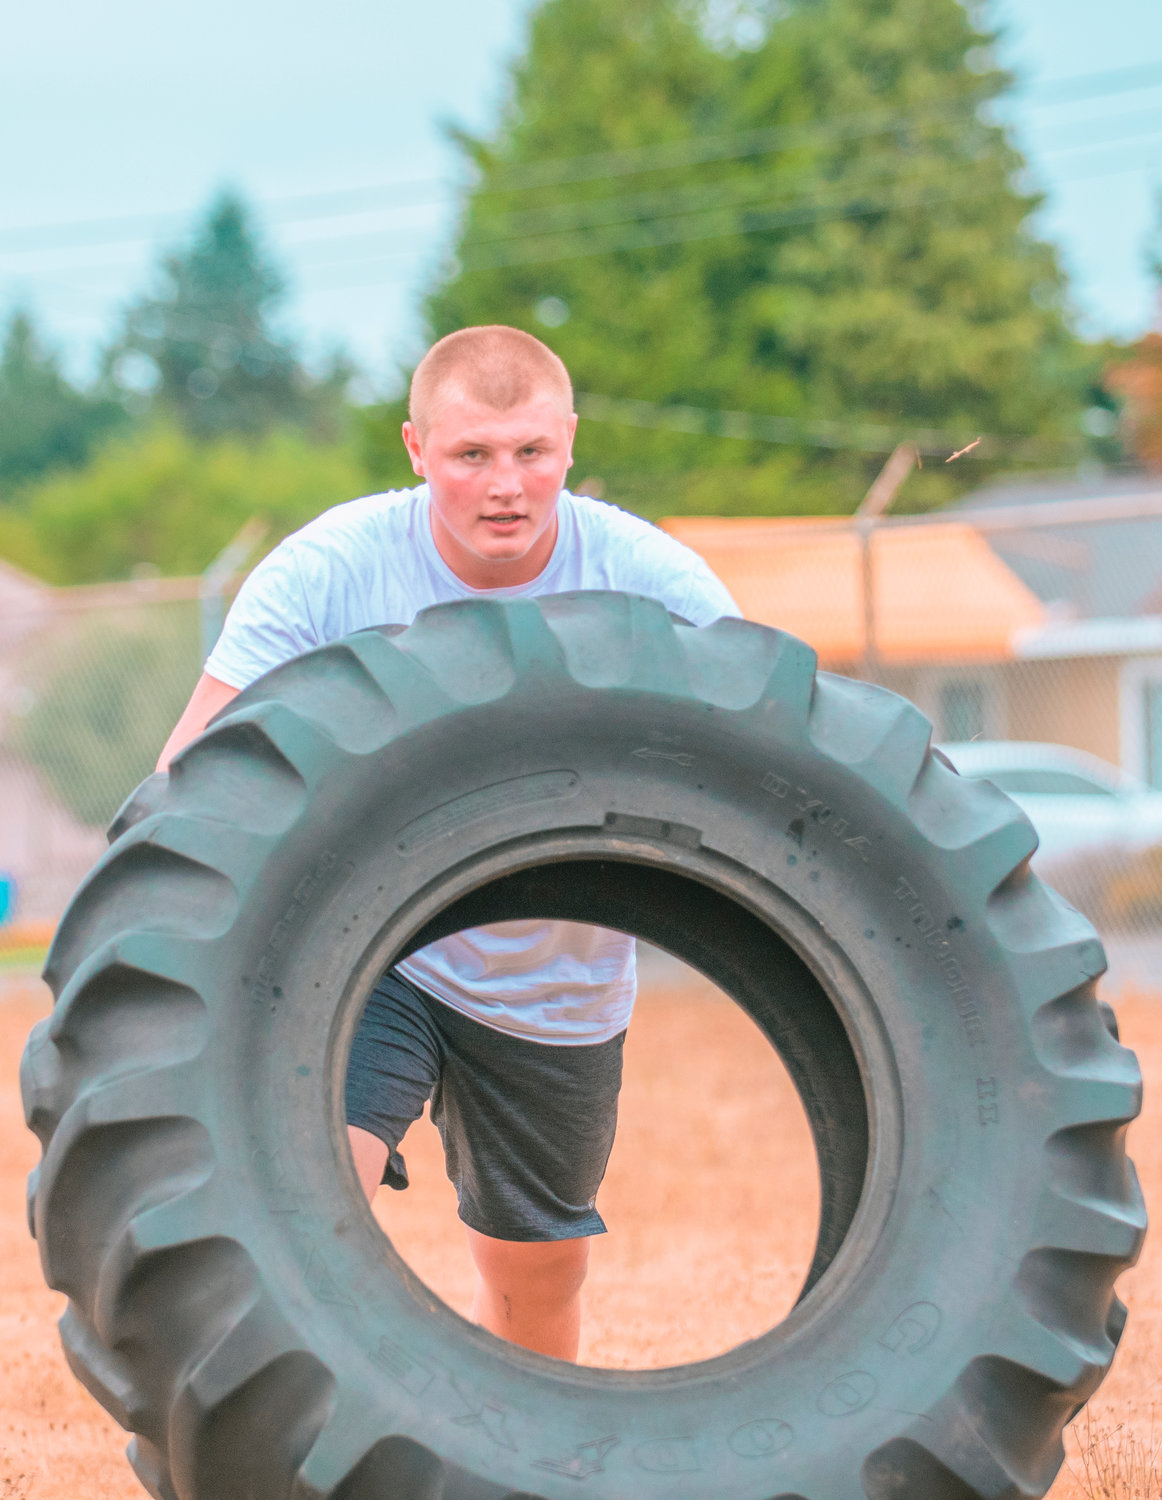 Centralia junior lineman Willie Stinkeoway flips tires during the first day of football practice on Wednesday.